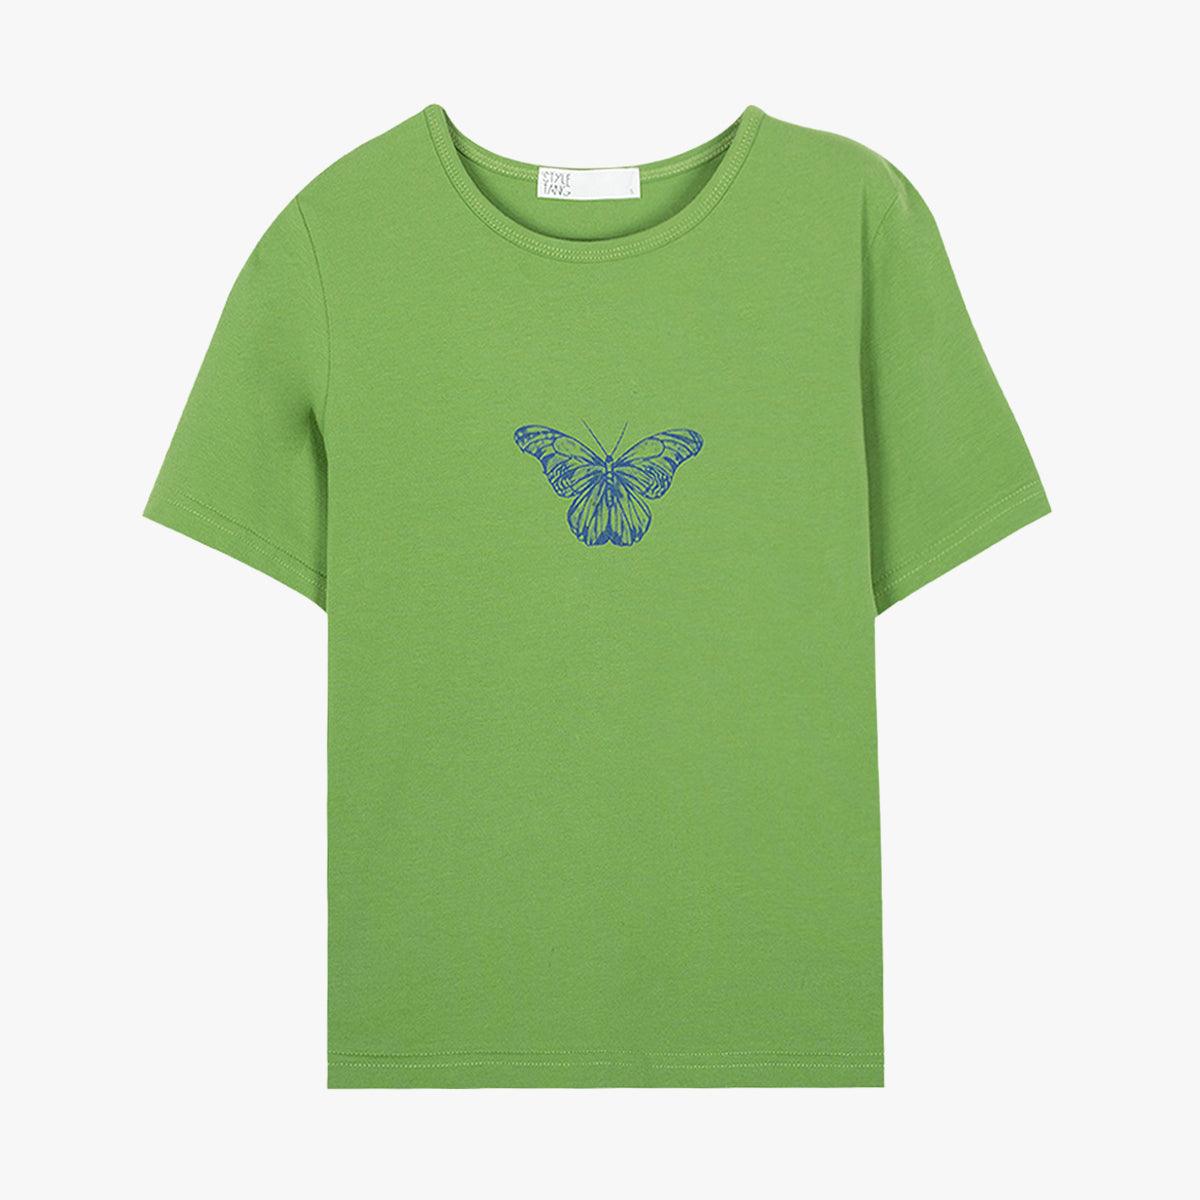 Indie Green Butterfly T-Shirt • Clothes Aesthetic Shop